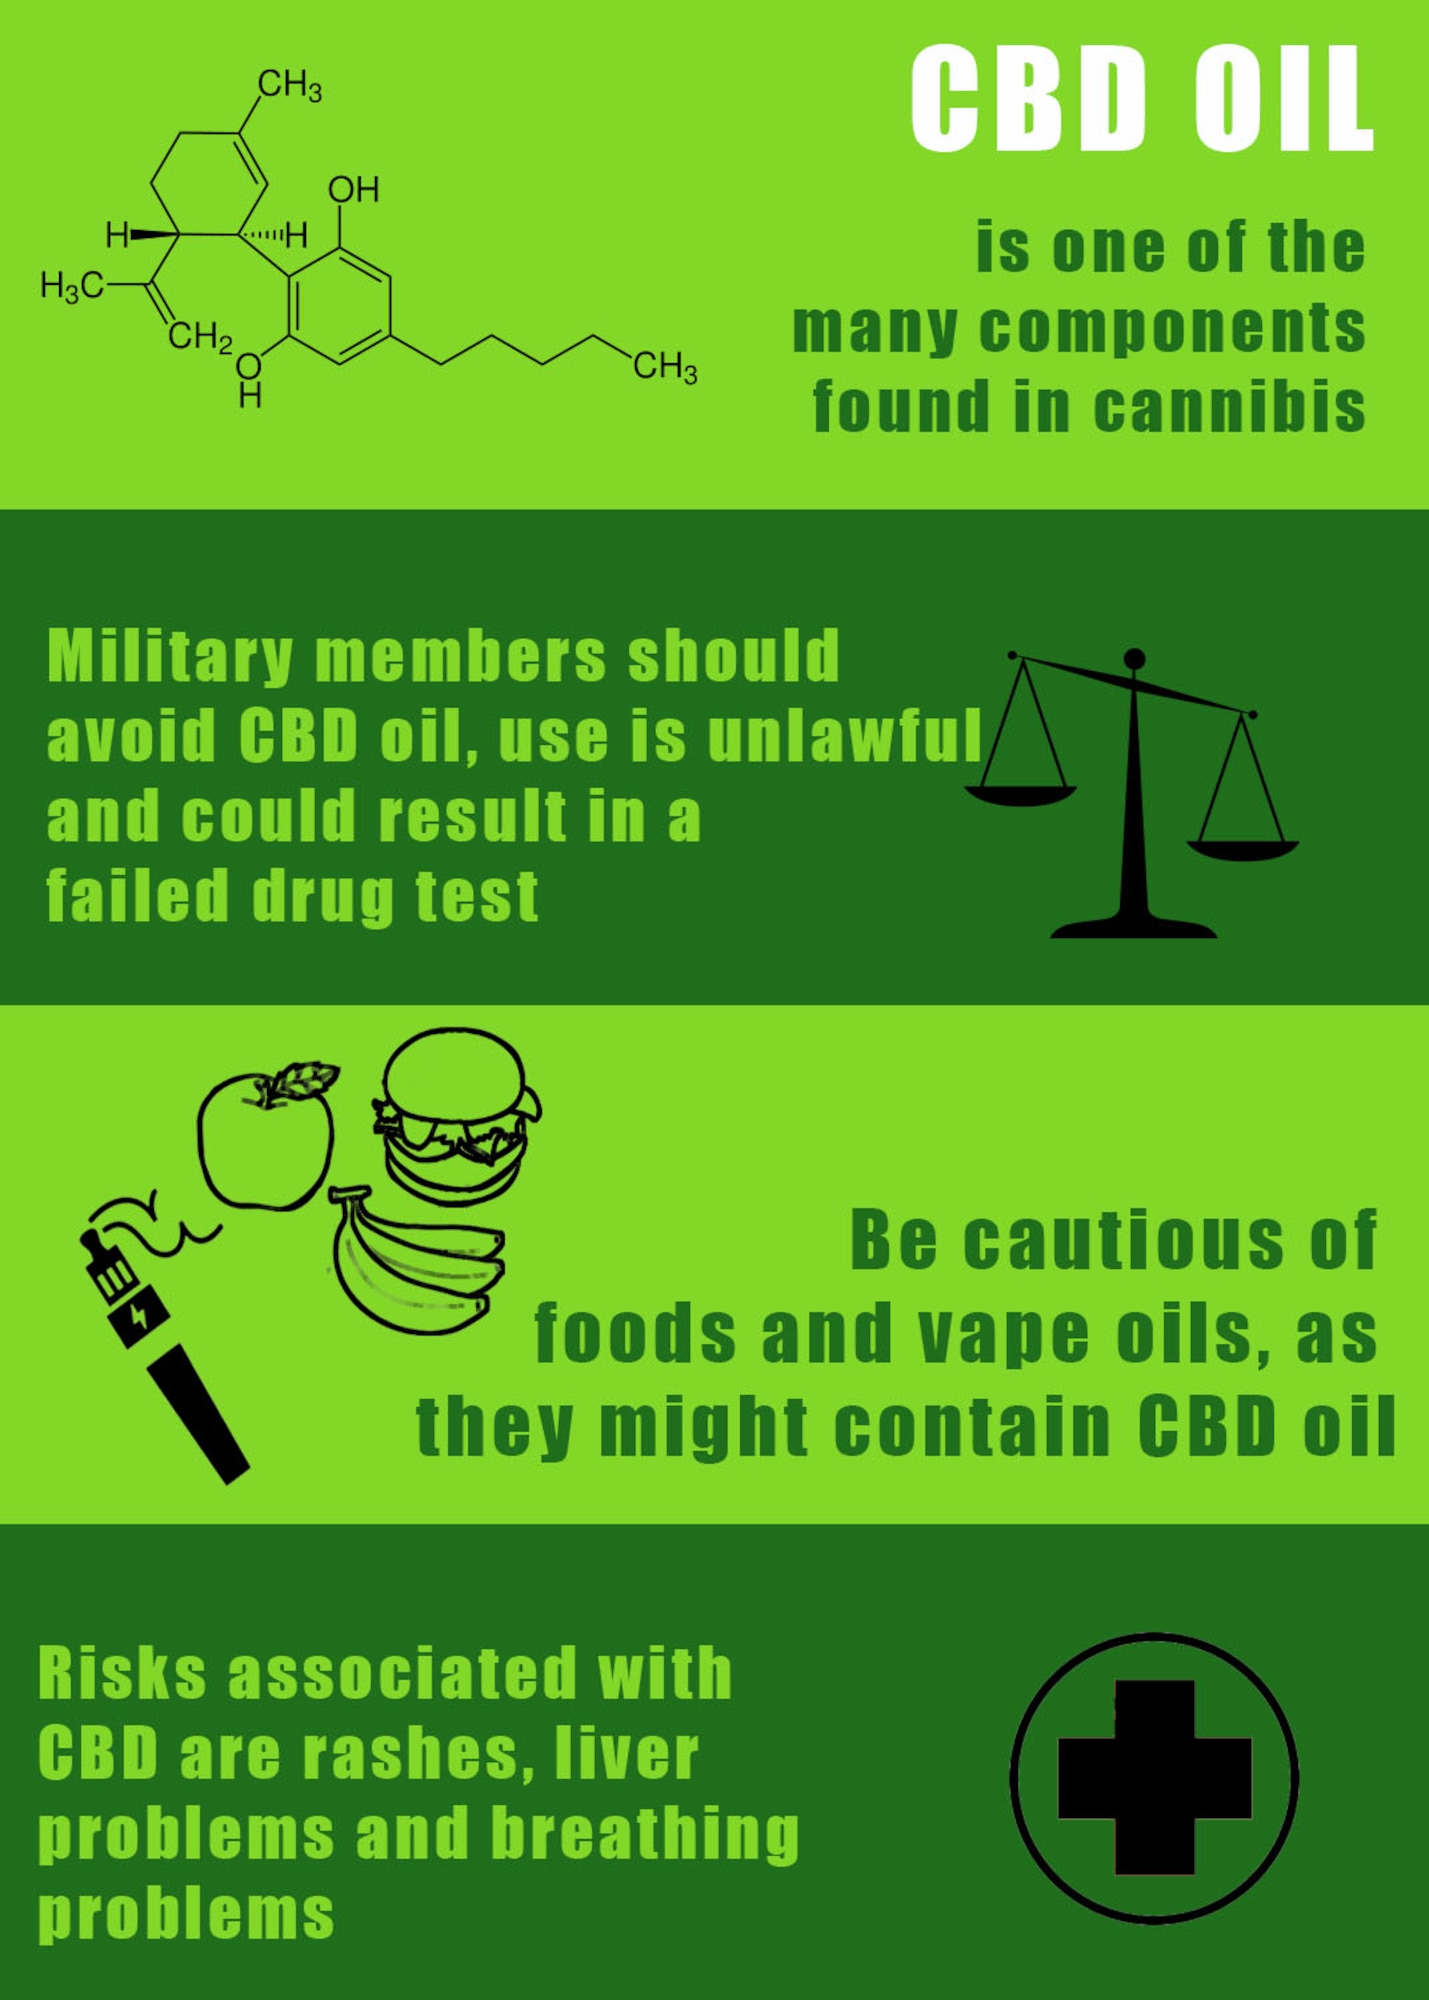 Cannabidiol (CBD) oil and related products are prohibited under the Uniform Code of Military Justice and Air Force Instruction 36-3208.